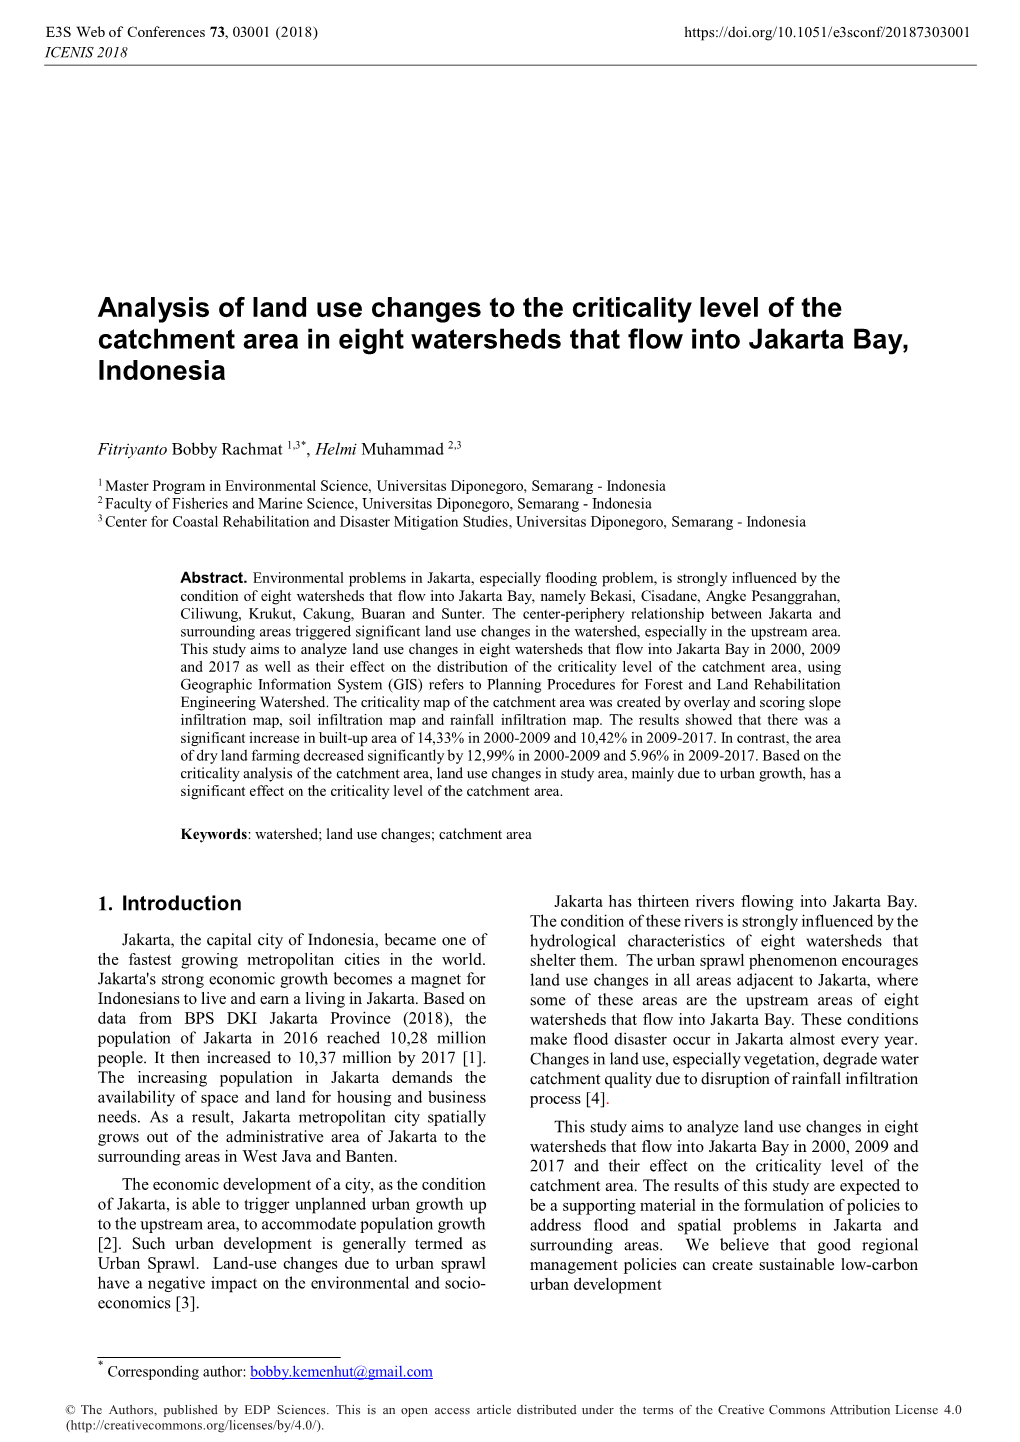 Analysis of Land Use Changes to the Criticality Level of the Catchment Area in Eight Watersheds That Flow Into Jakarta Bay, Indonesia